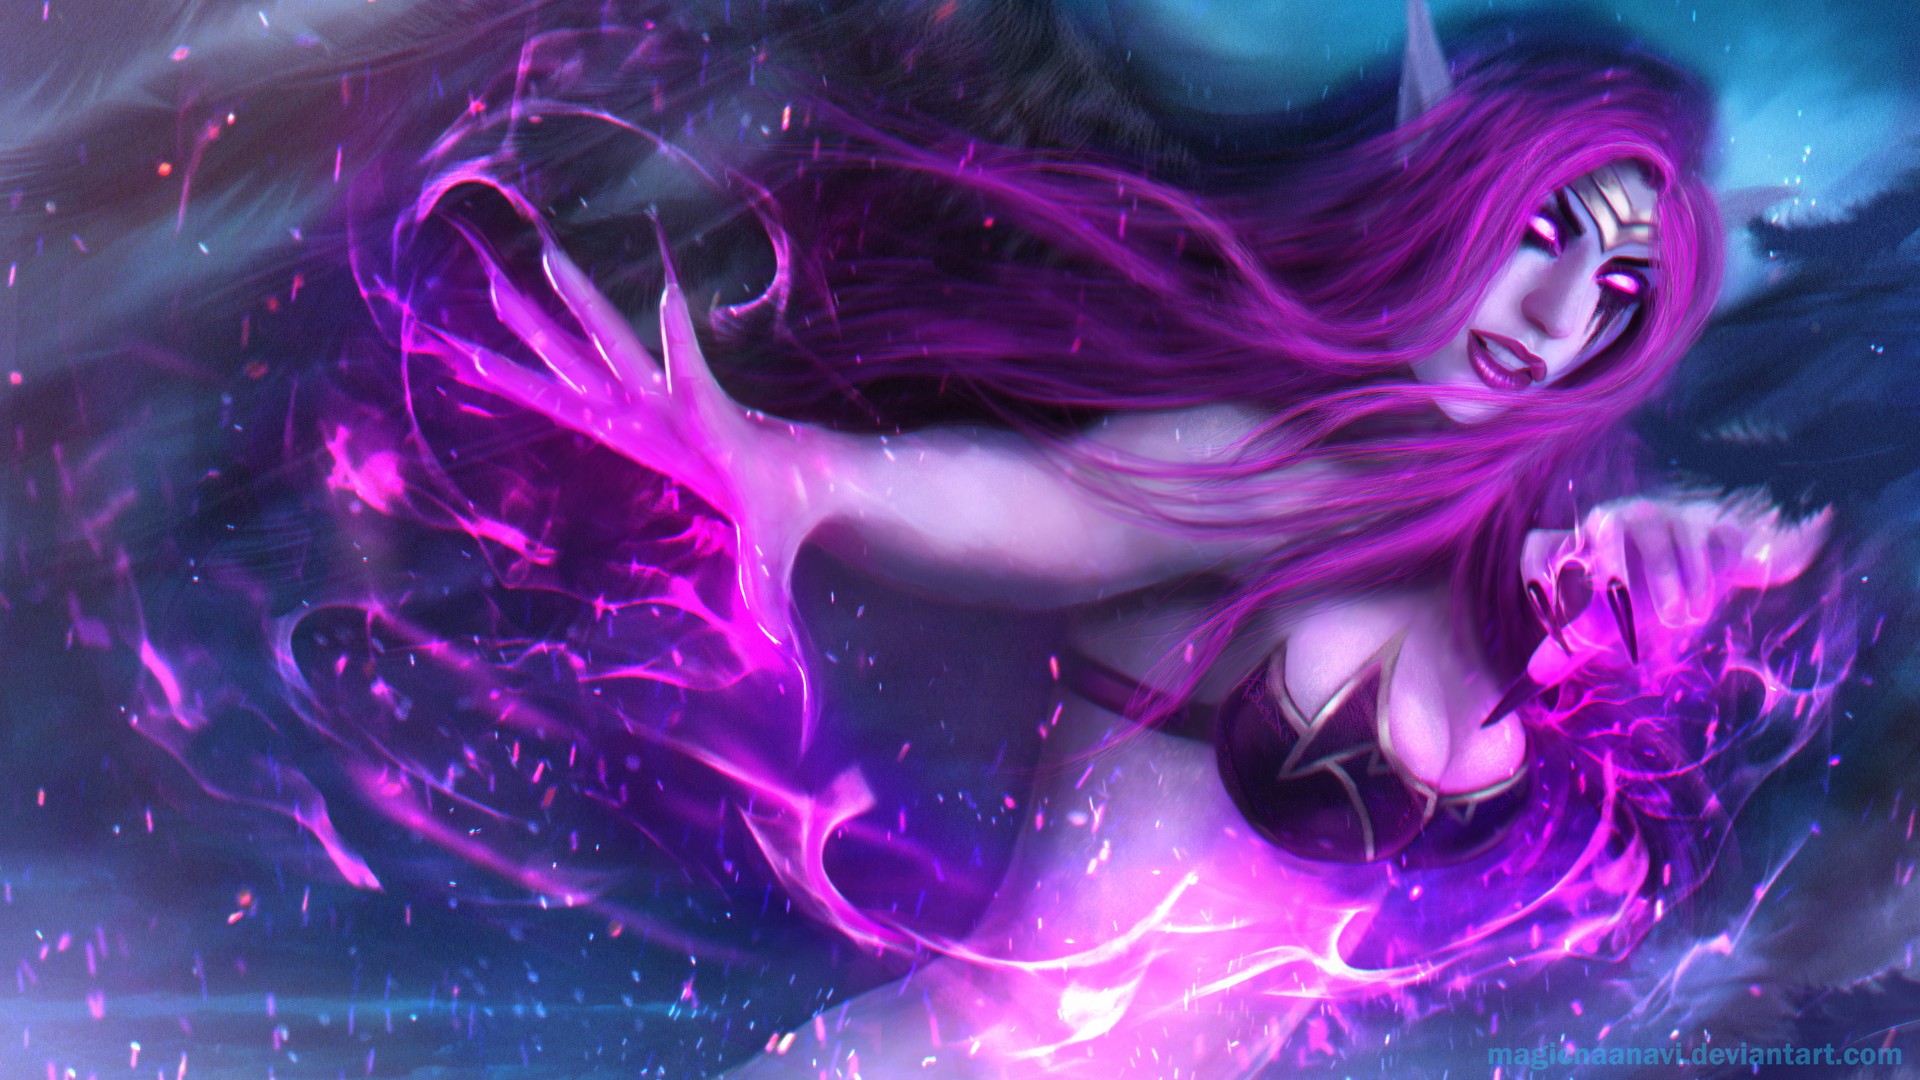 General 1920x1080 anime girls anime realistic pink hair pink eyes Morgana (League of Legends) League of Legends MagicnaAnavi video games PC gaming video game art glowing eyes boobs bra fantasy girl fantasy art